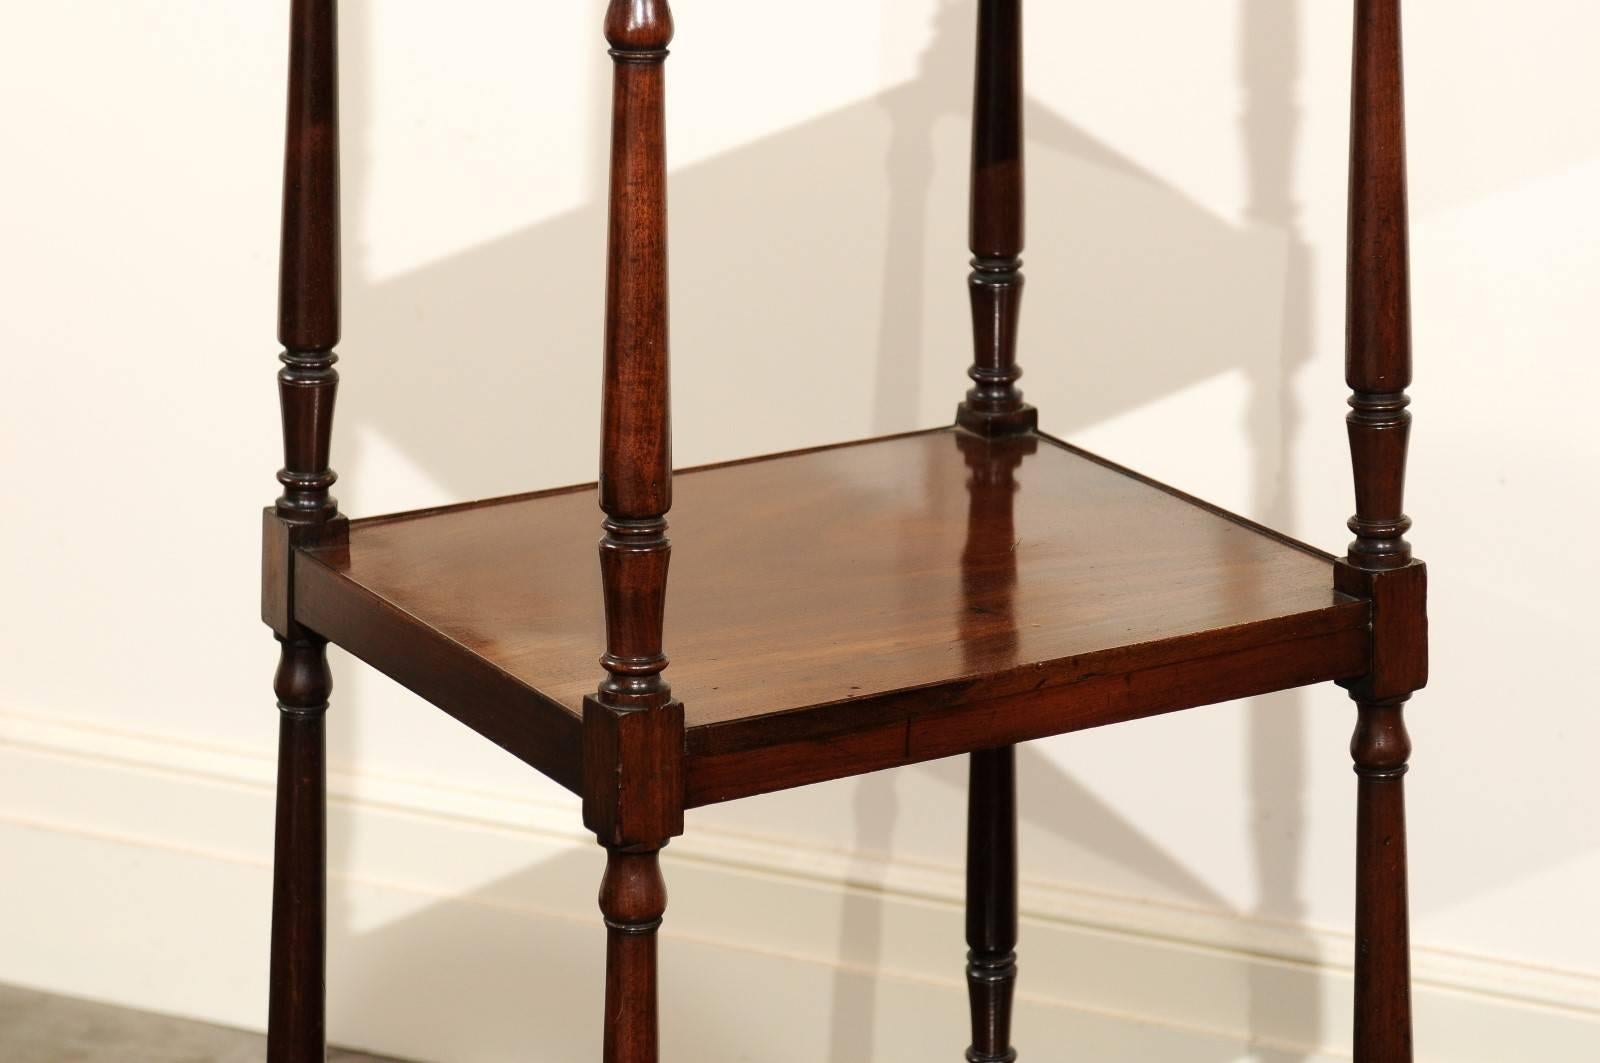 Wood English Mahogany Trolley with Graduated Shelves from the Mid-19th Century For Sale